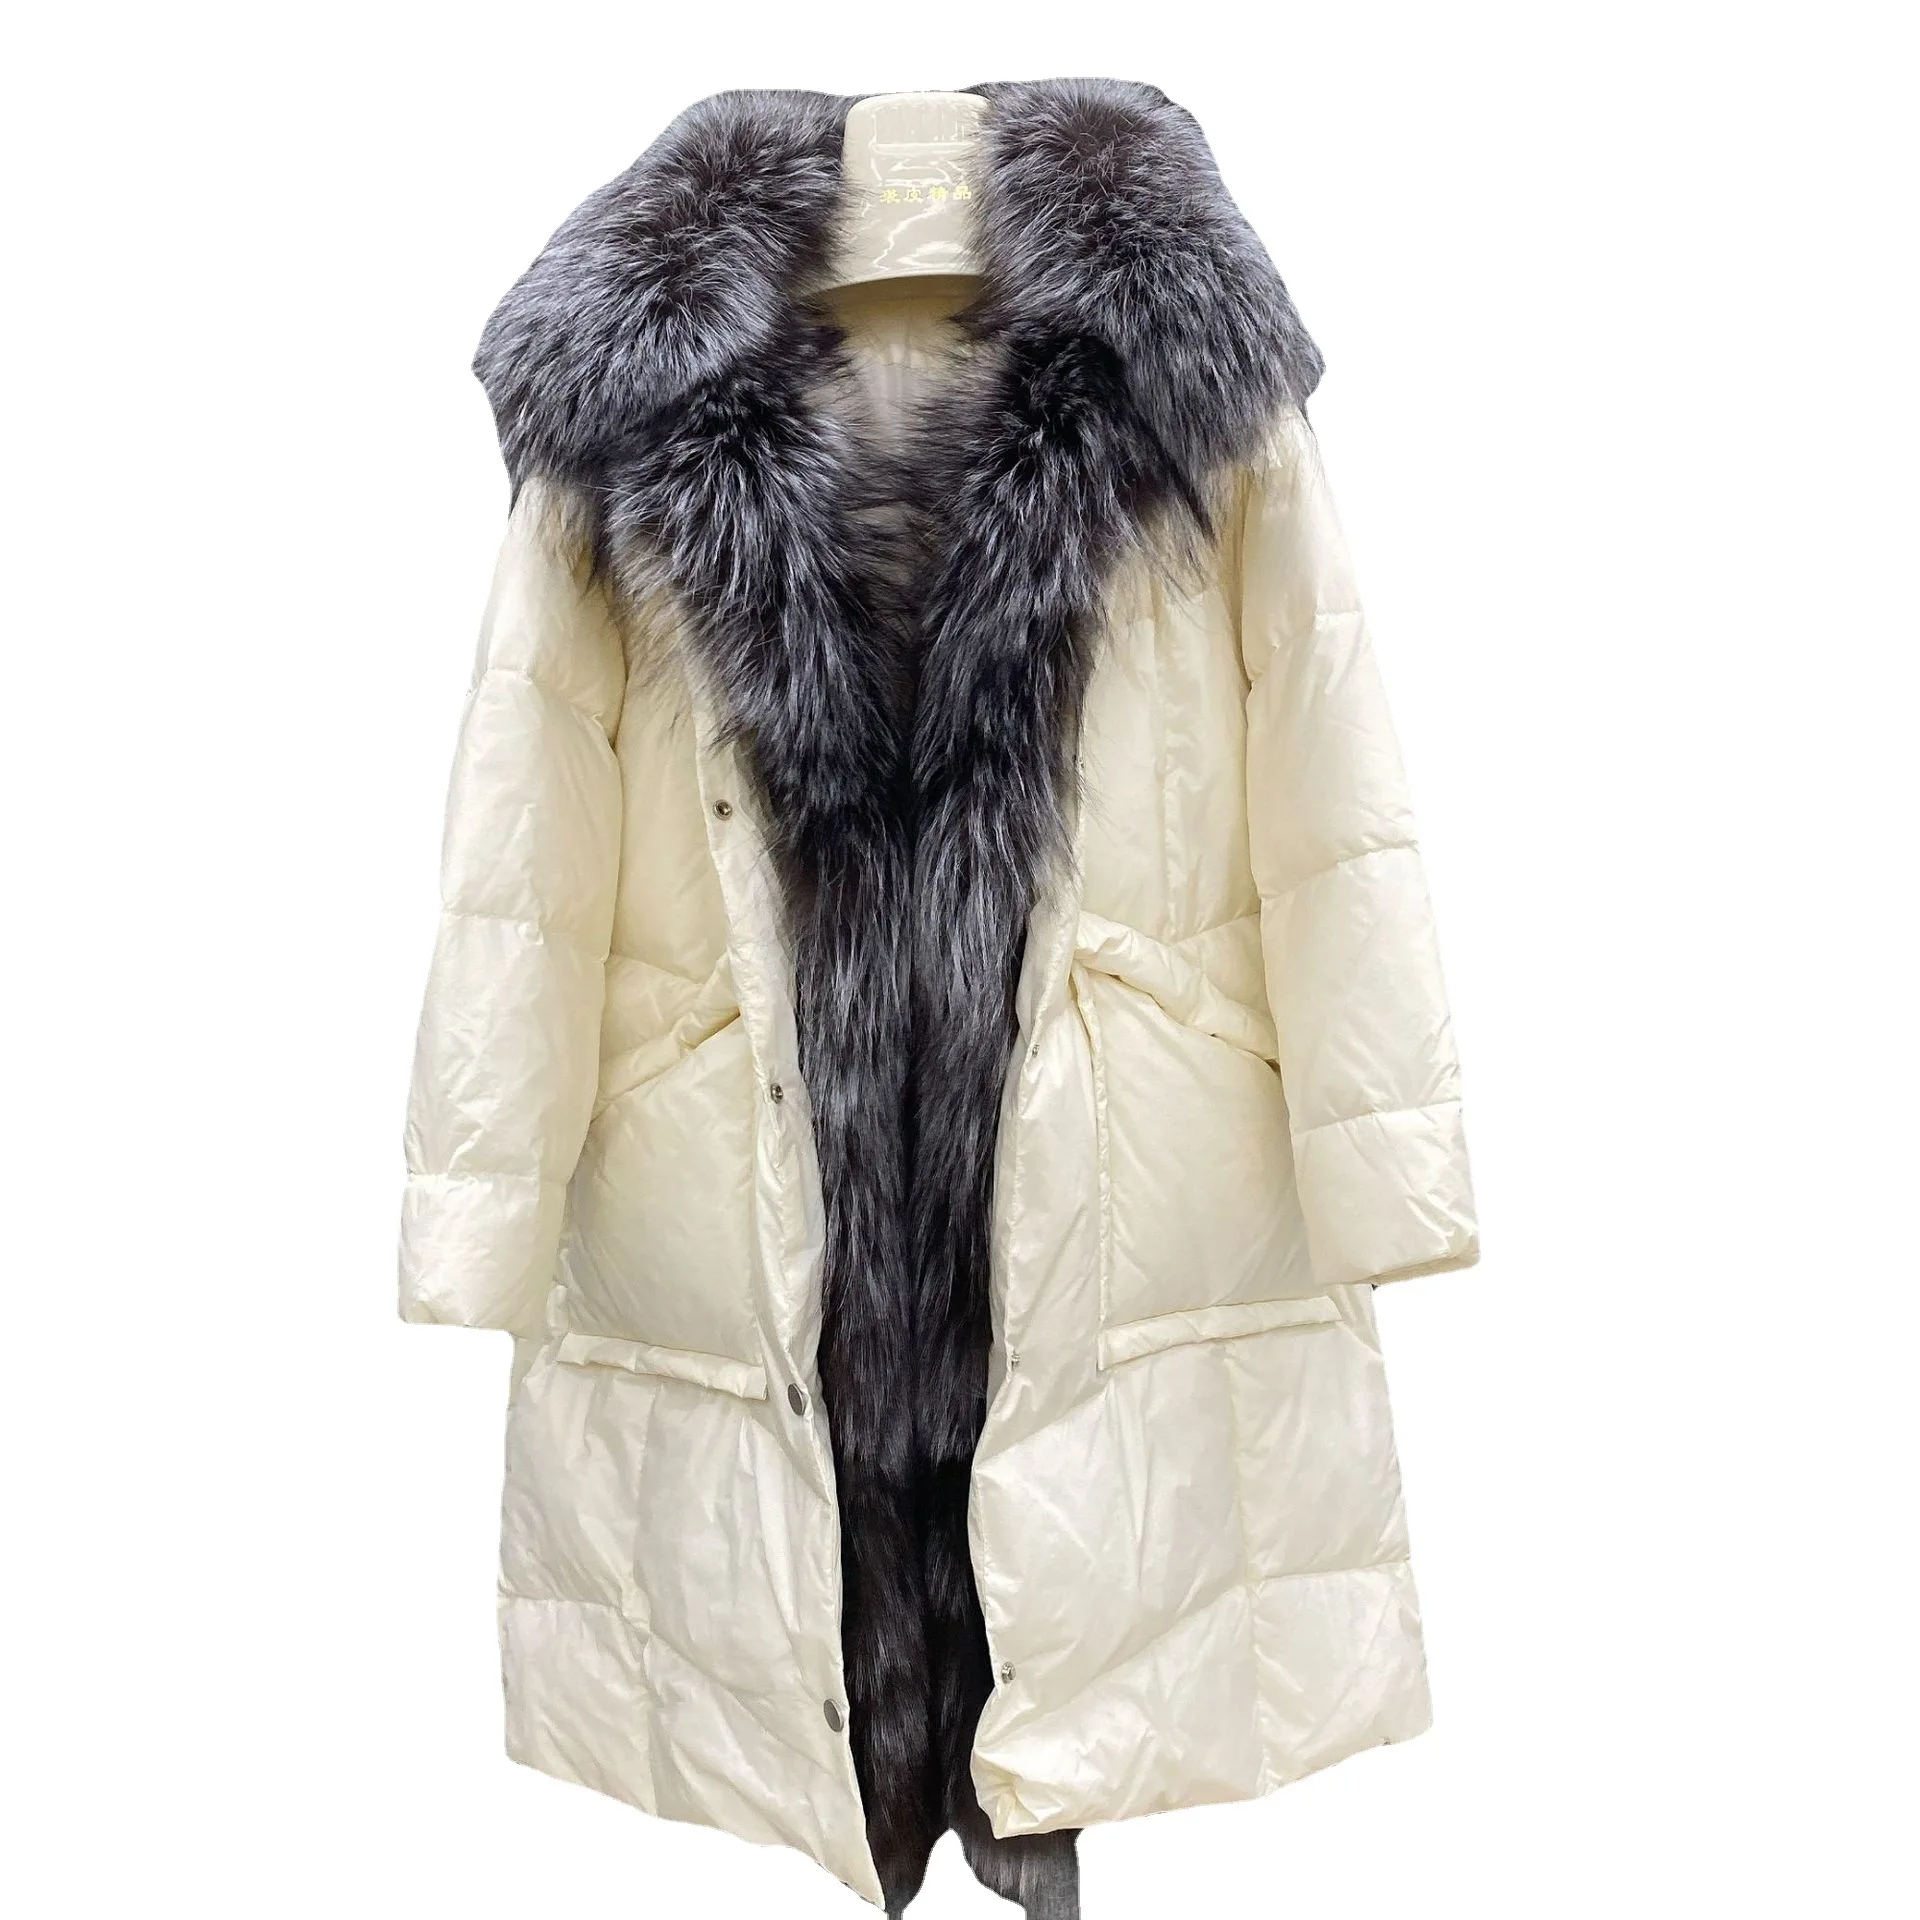 Women's Mid-Length Fashion White Goose down Coat Leather Fur Coat Winter Thickened Goose down Big Fur Collar down Jacket enlarge